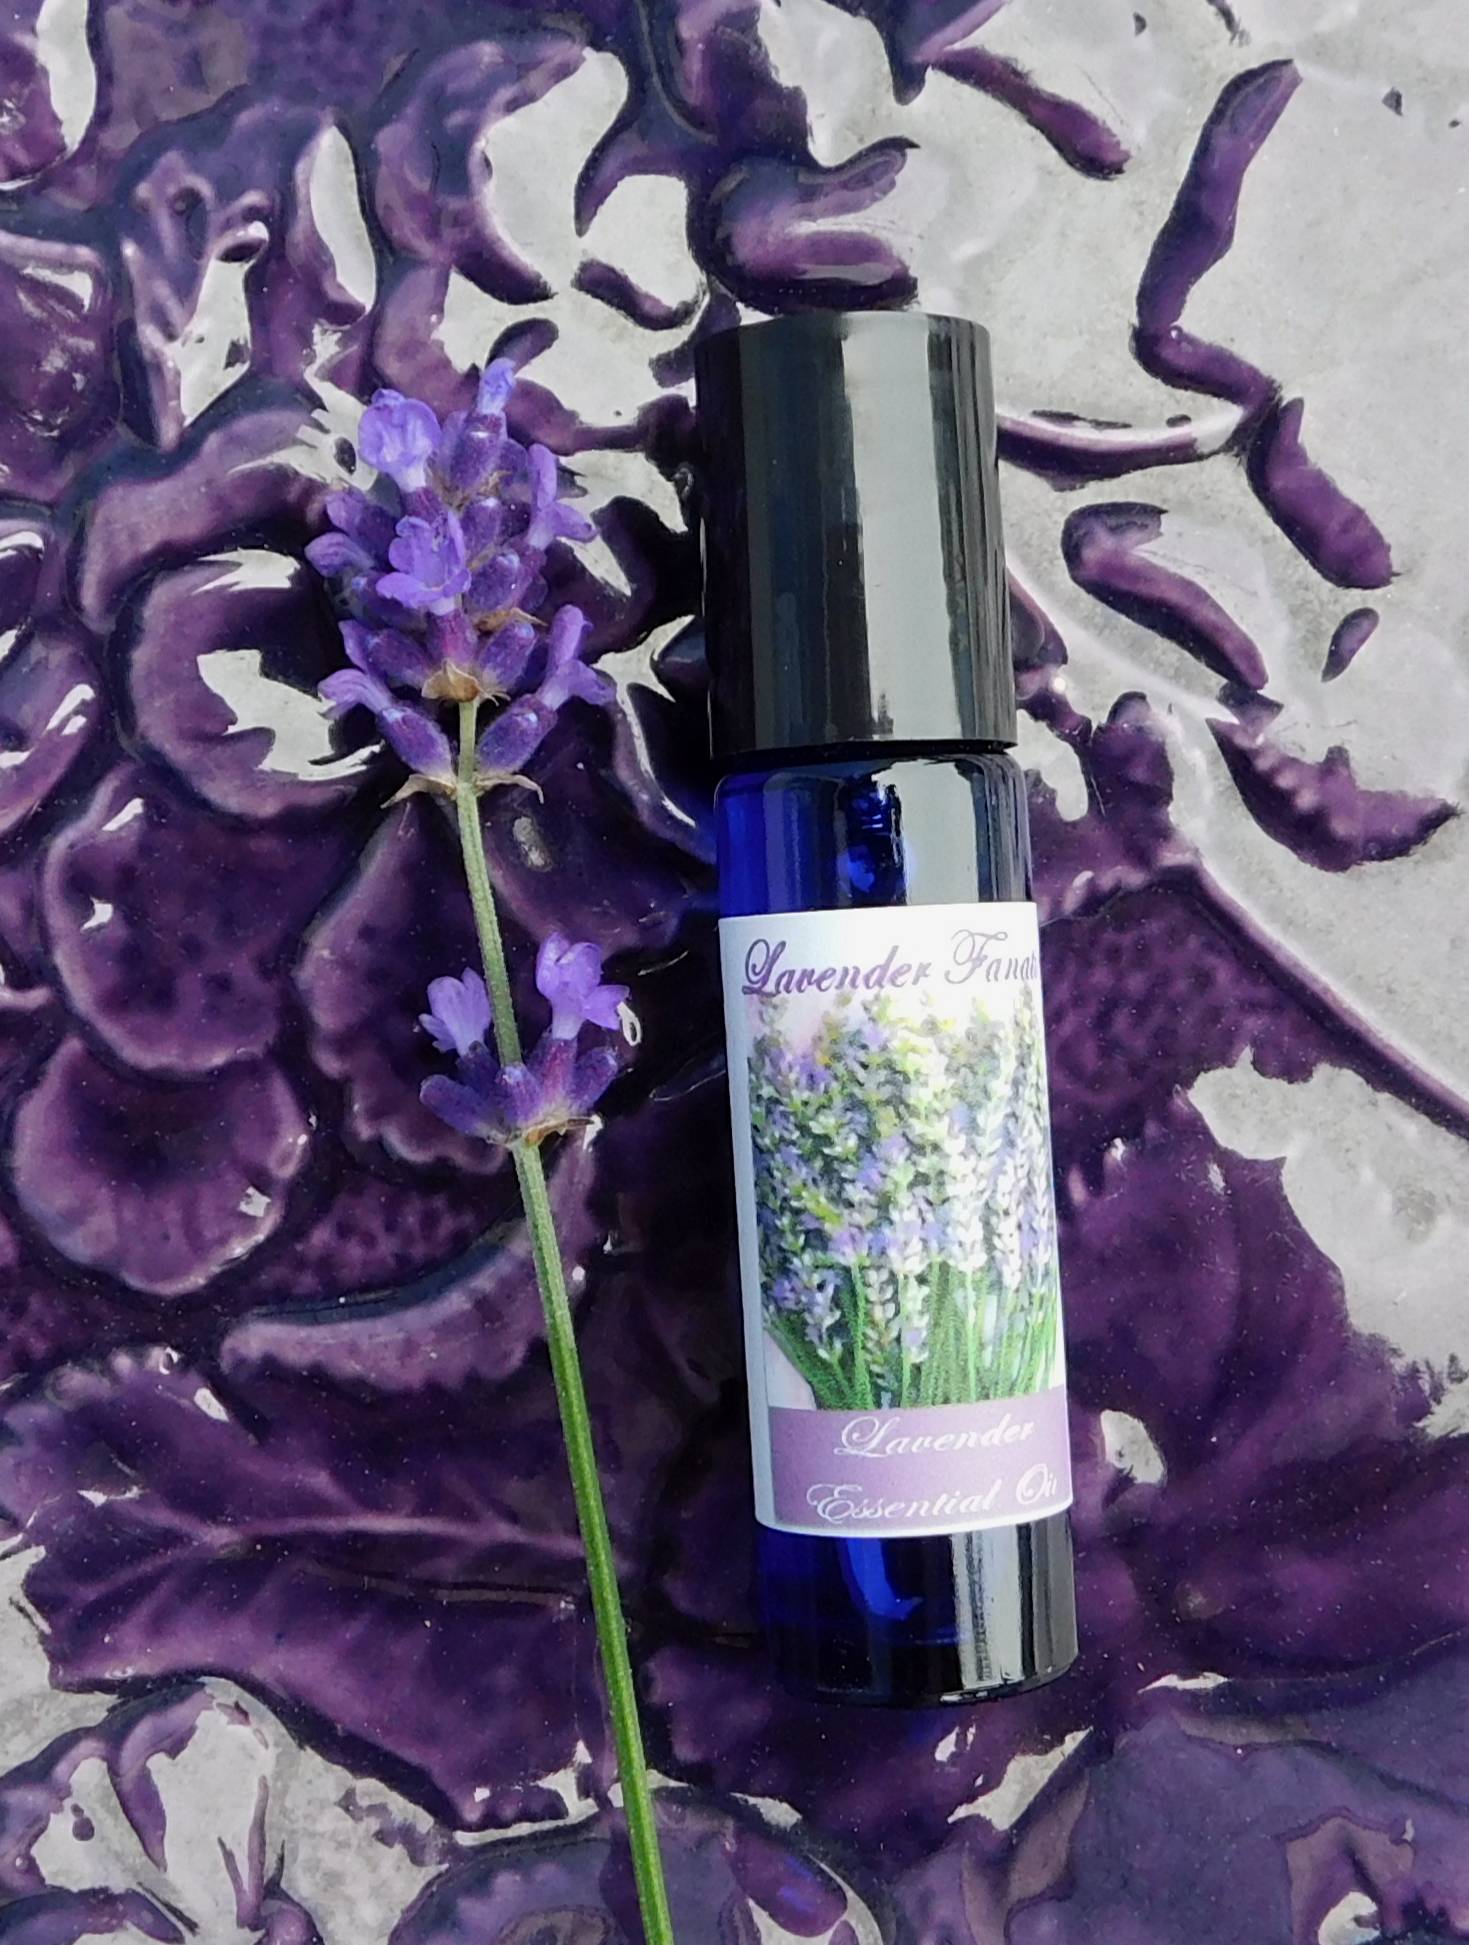 Pure lavender essential oil roller bottle from Lavender Fanatic.